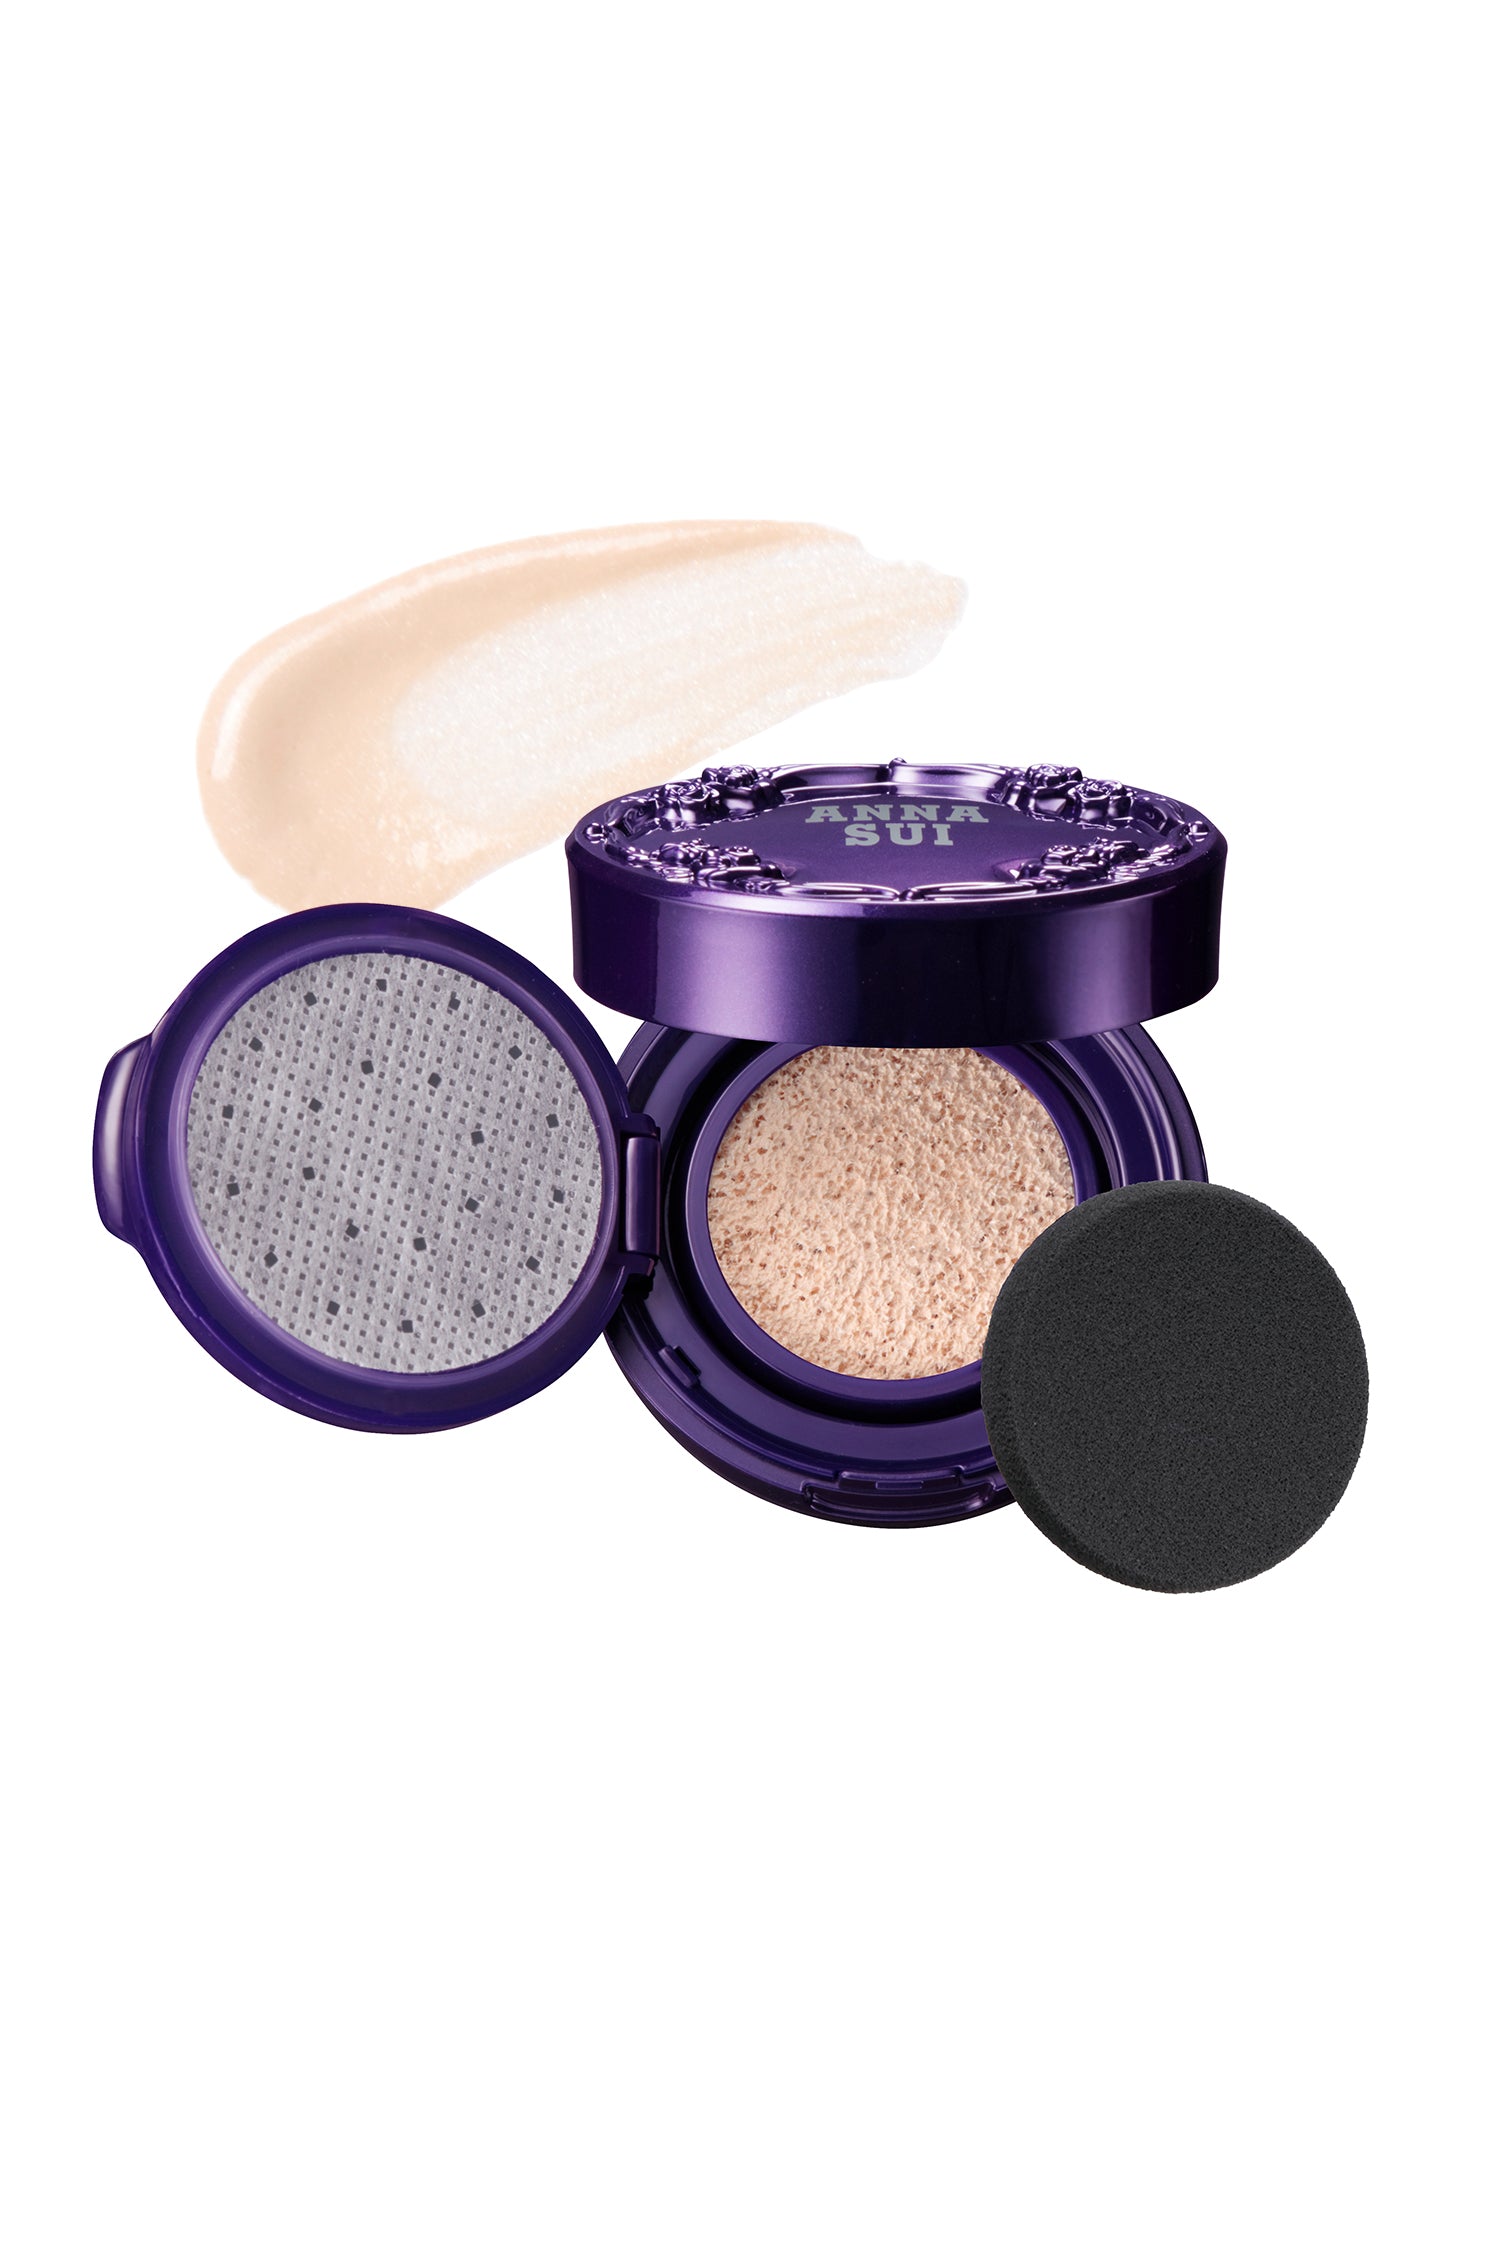 Purple round case, raised rose pattern and label, bottom, liquid face powder, on the left an open lid, black cushion